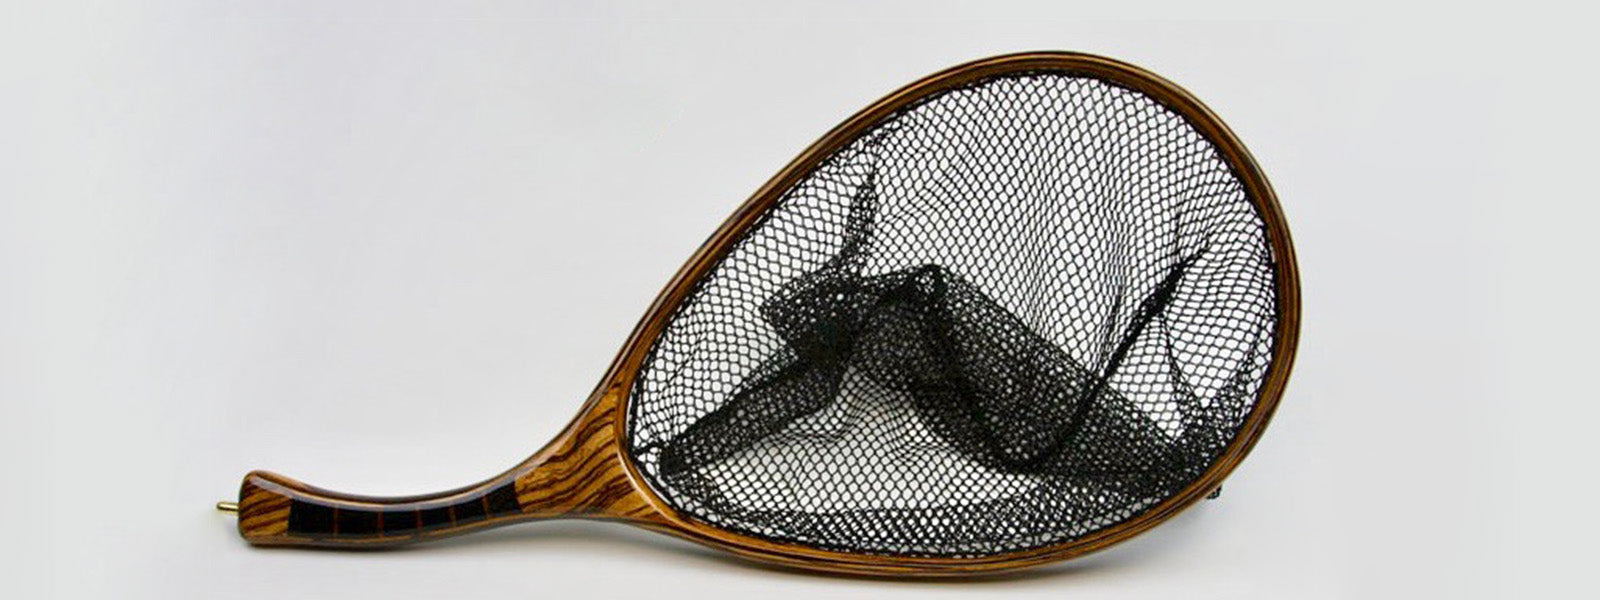 Do I Need a Net for Fly Fishing?